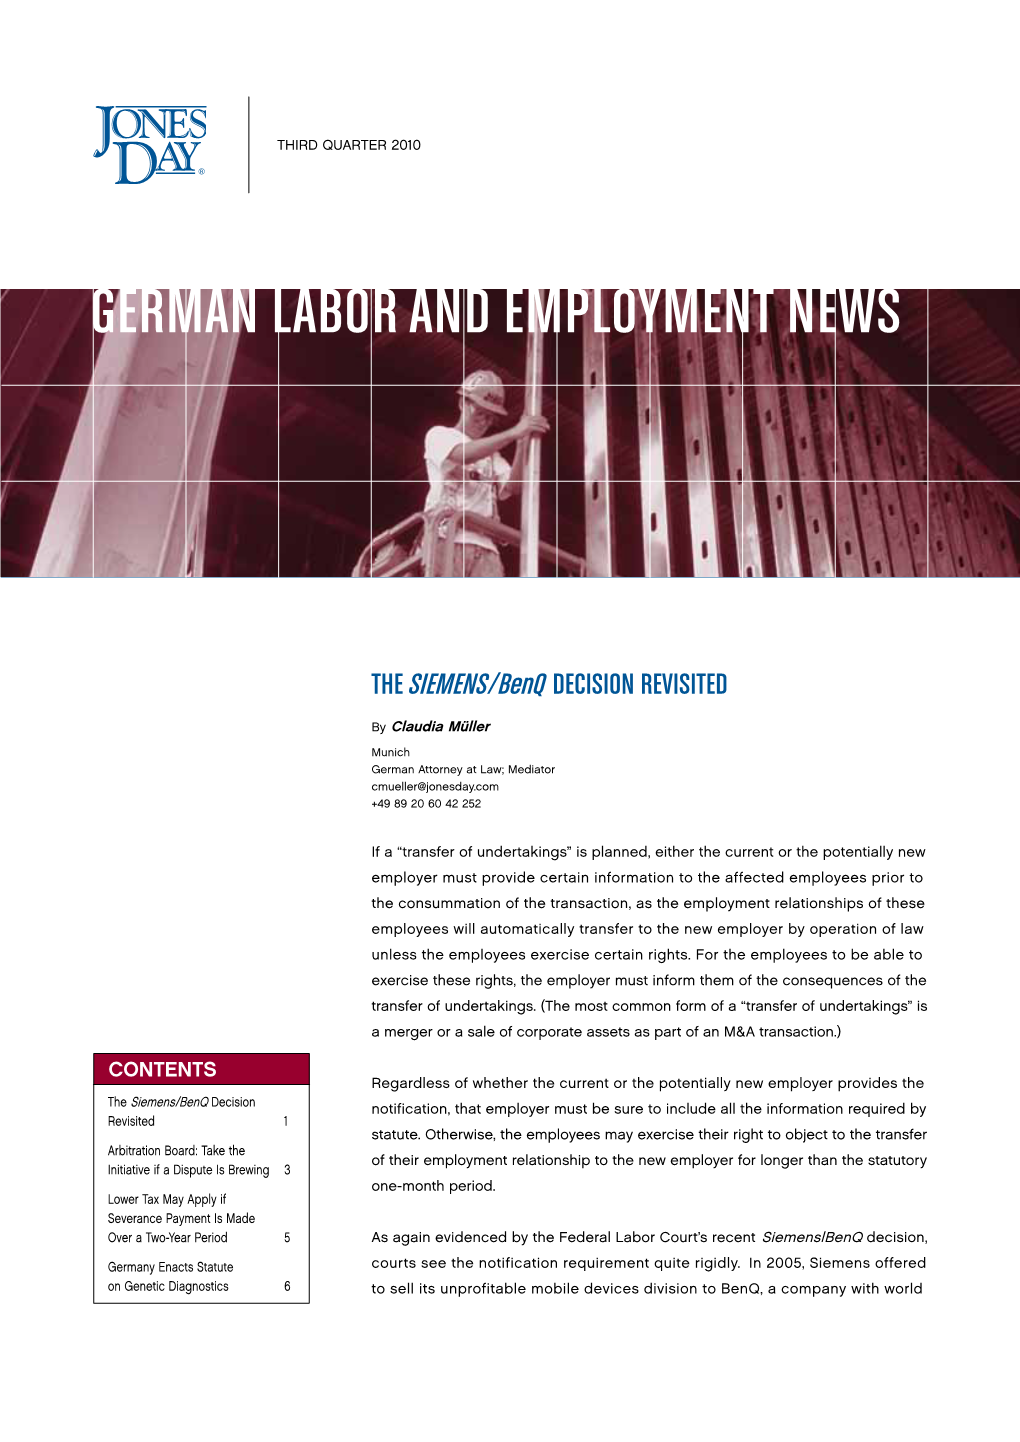 German Labor and Employment News